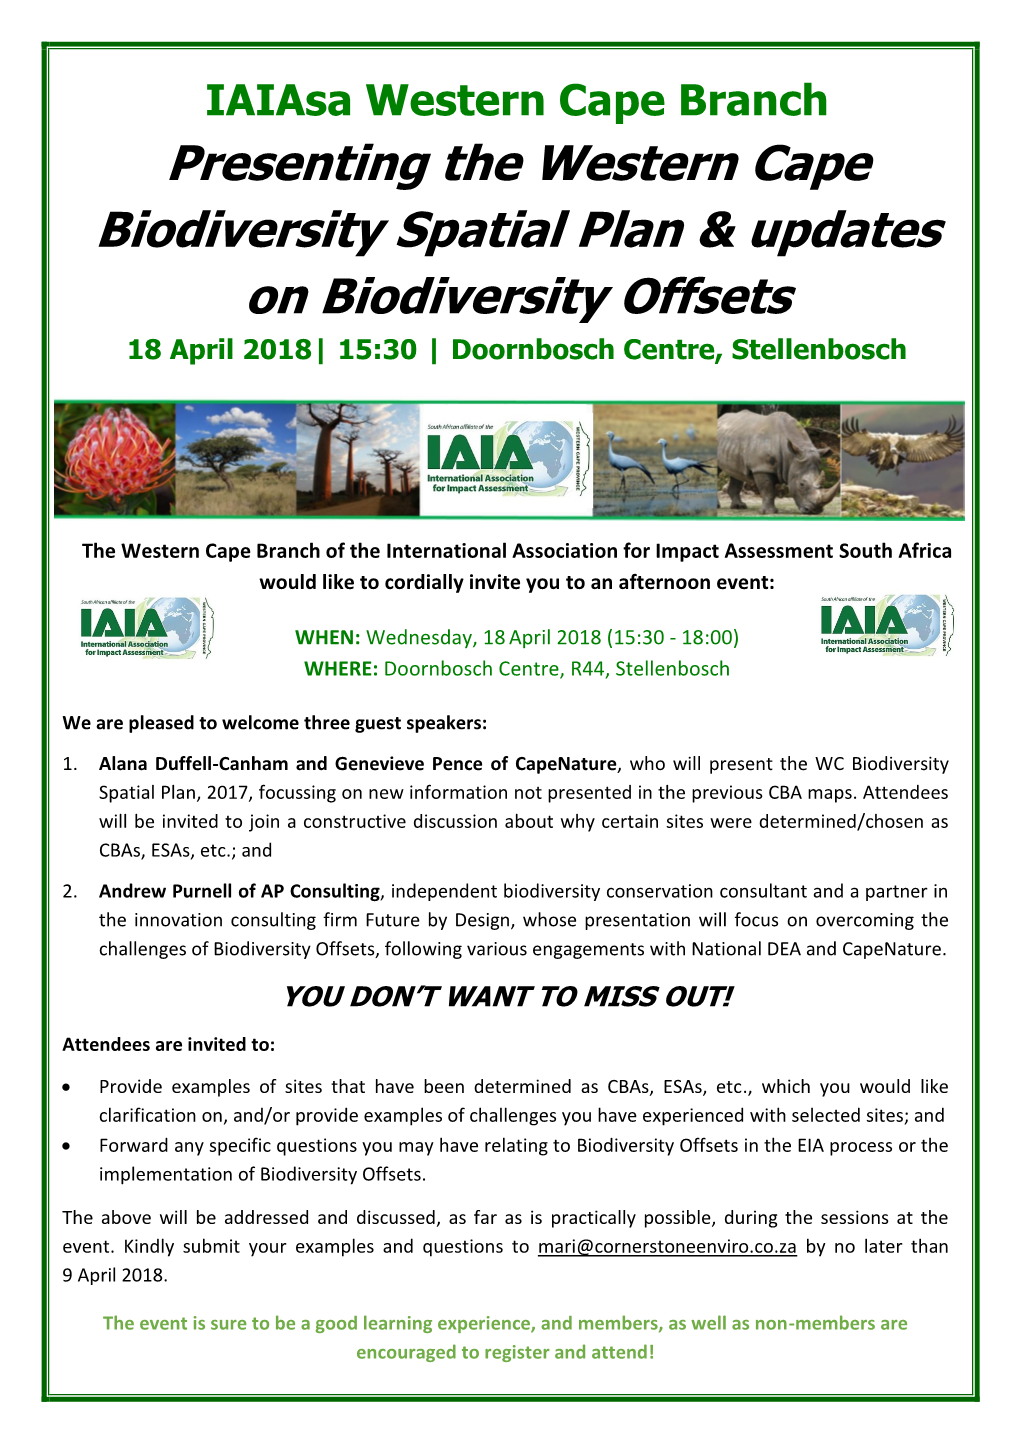 Presenting the Western Cape Biodiversity Spatial Plan & Updates